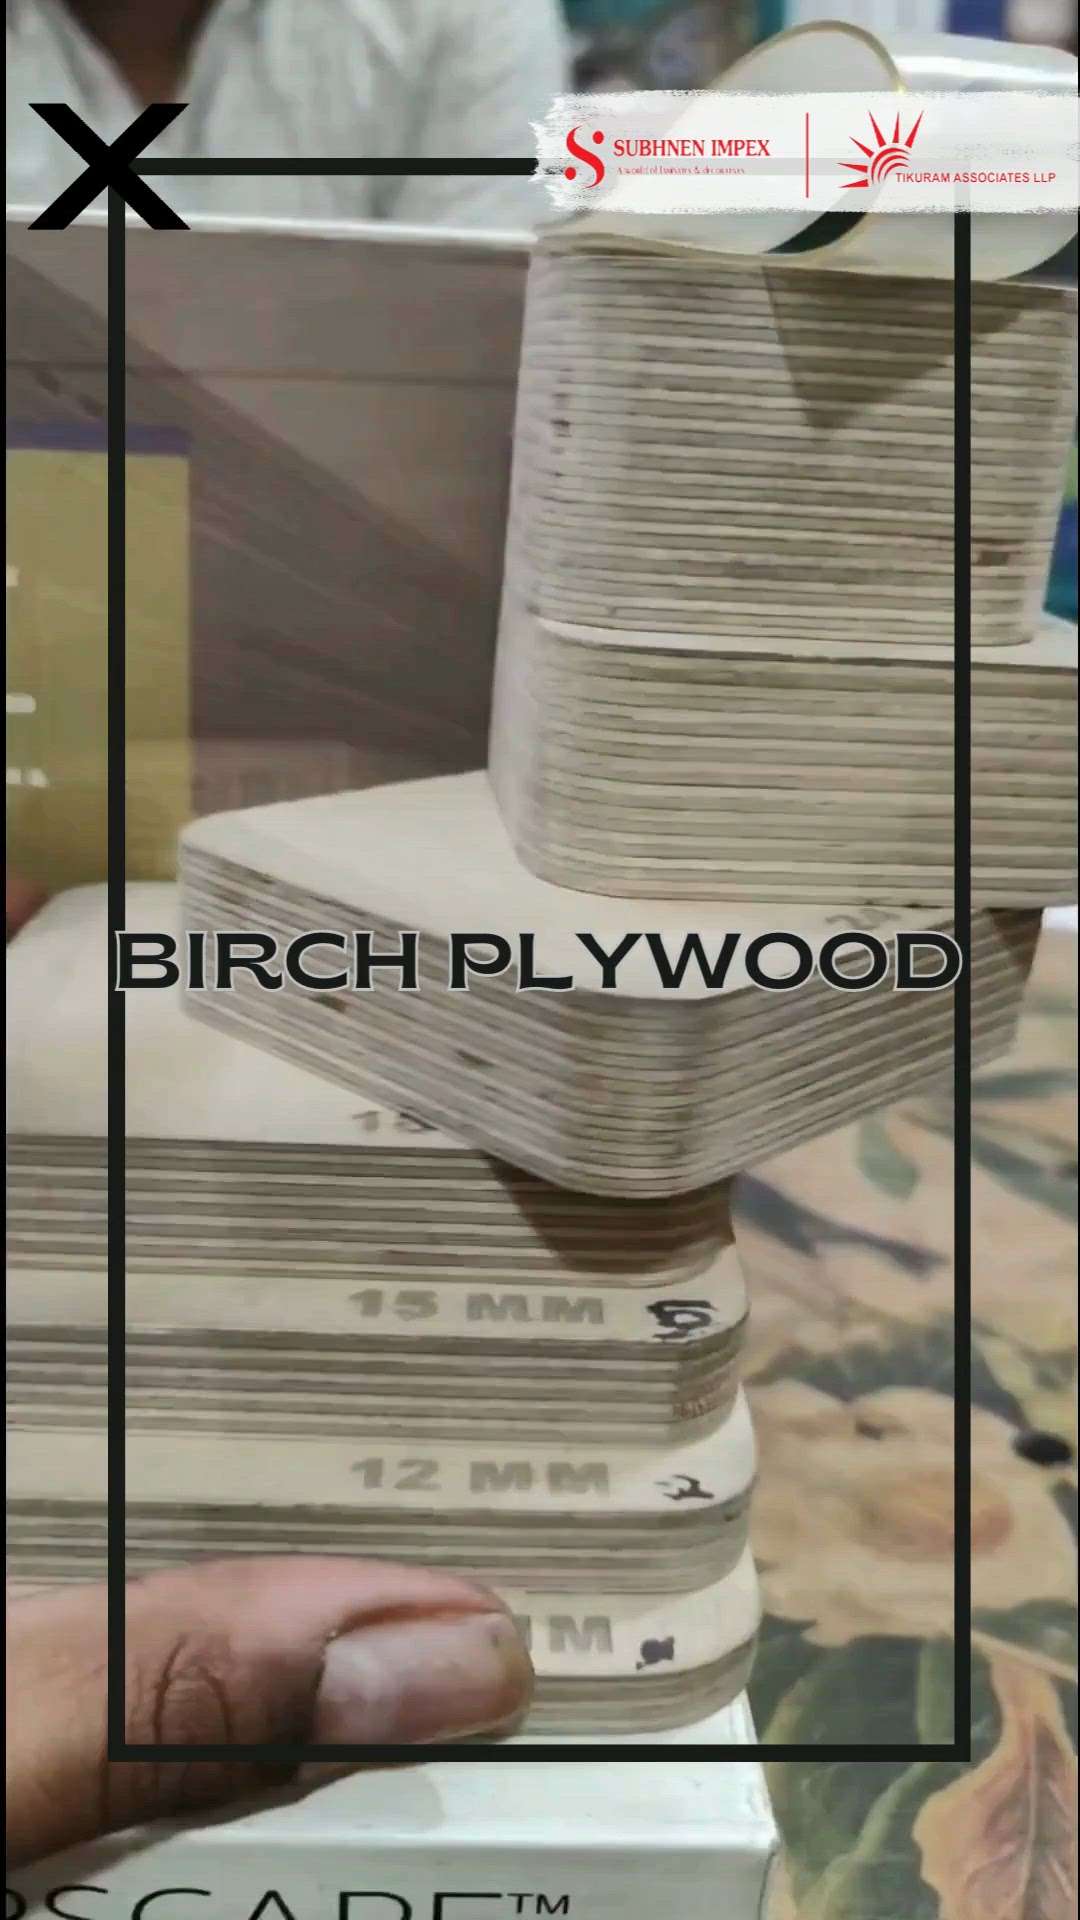 BIRCH PLYWOOD

  Available in all sizes and thickness

#birchplywood #Architect #InteriorDesigner #architecturedesigns #Architectural&Interior #Designs